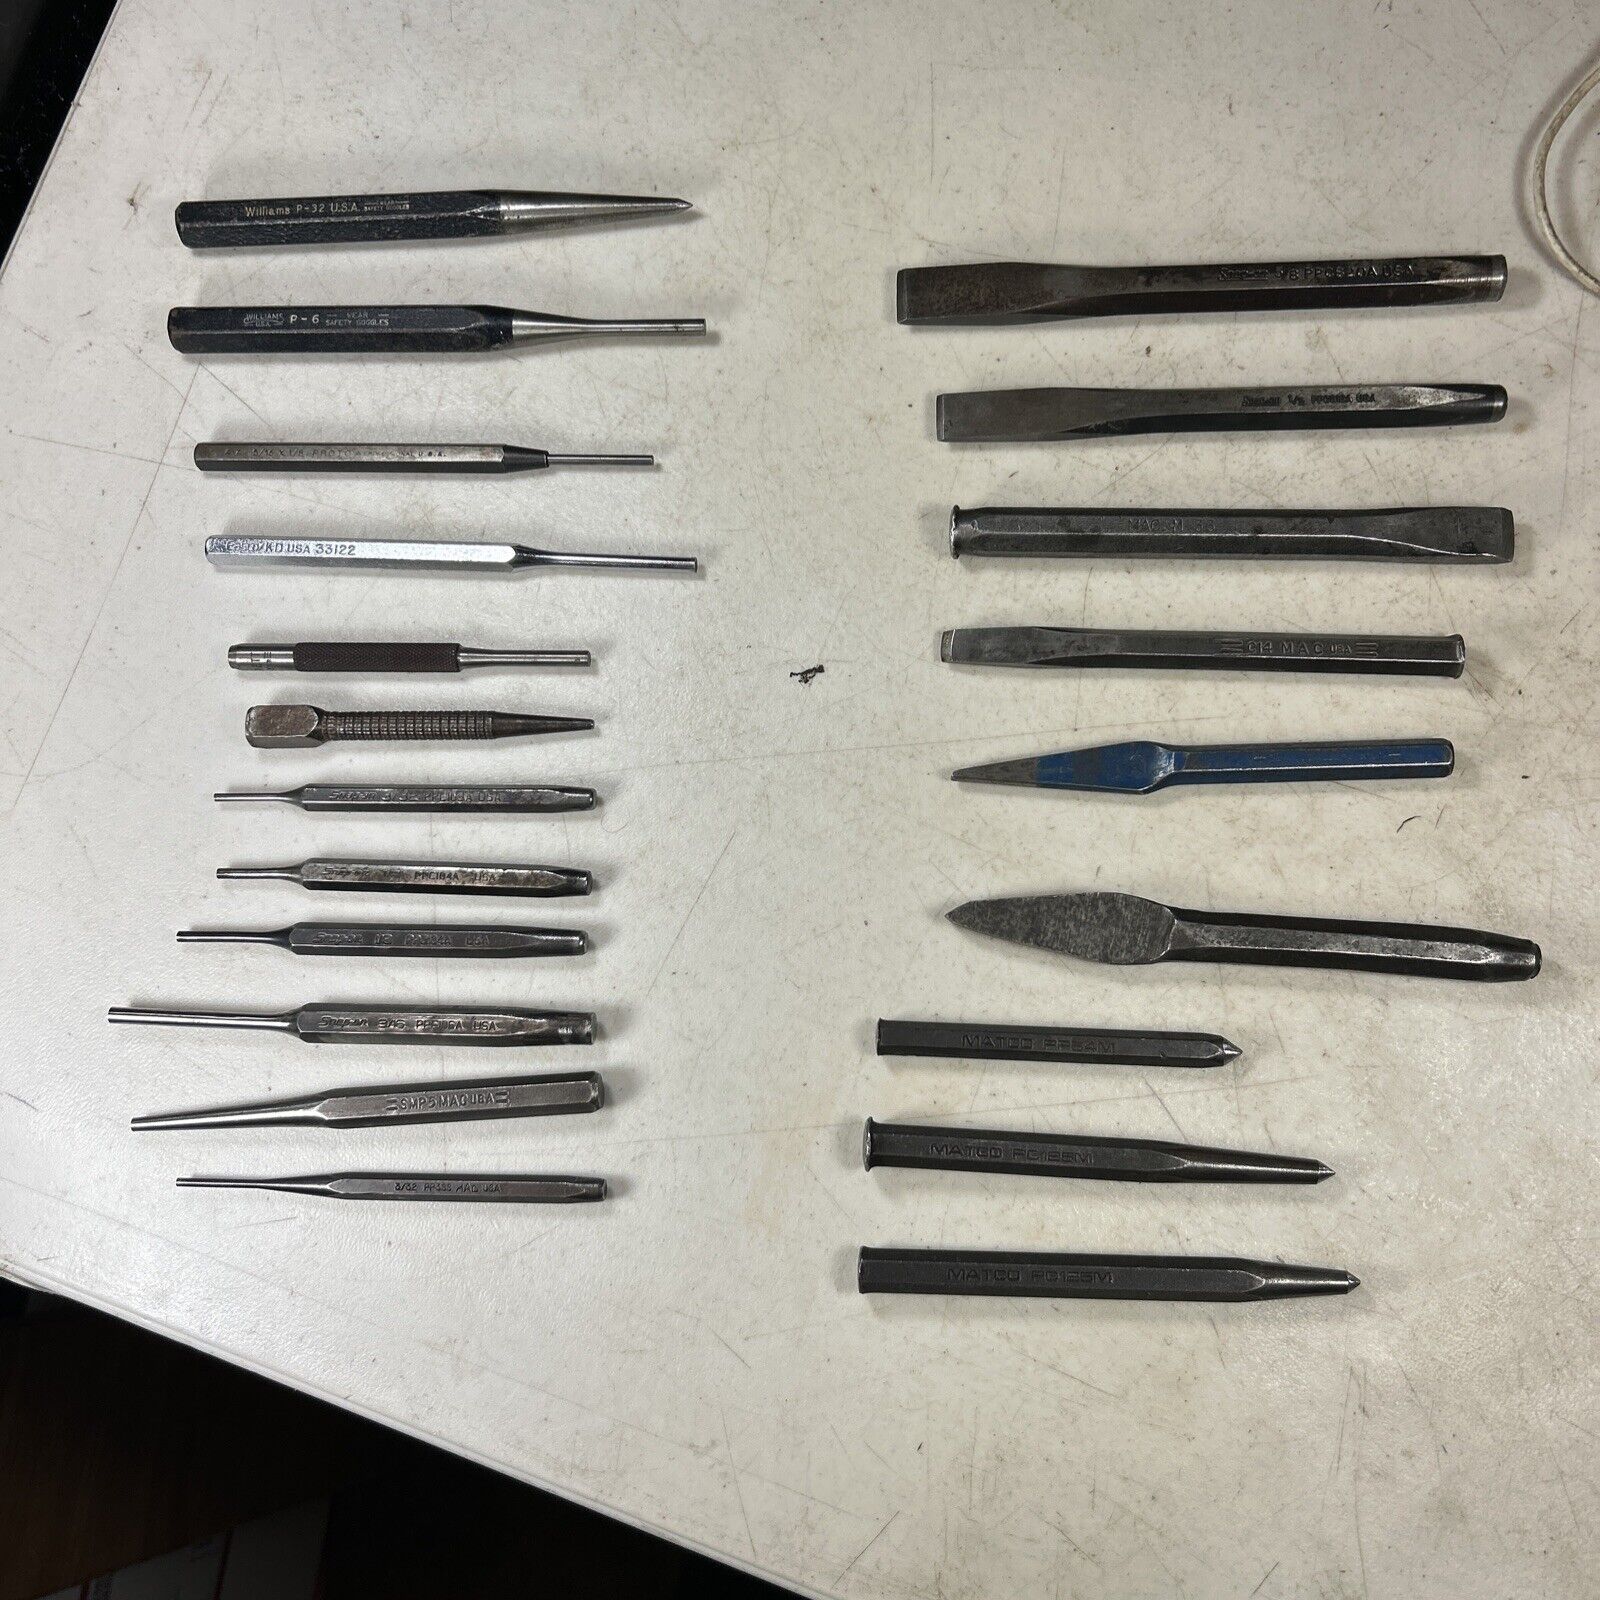 Big Lot Of Chisels And Punches Various Sizes & Brands, Snap On,Mac,Matco & More